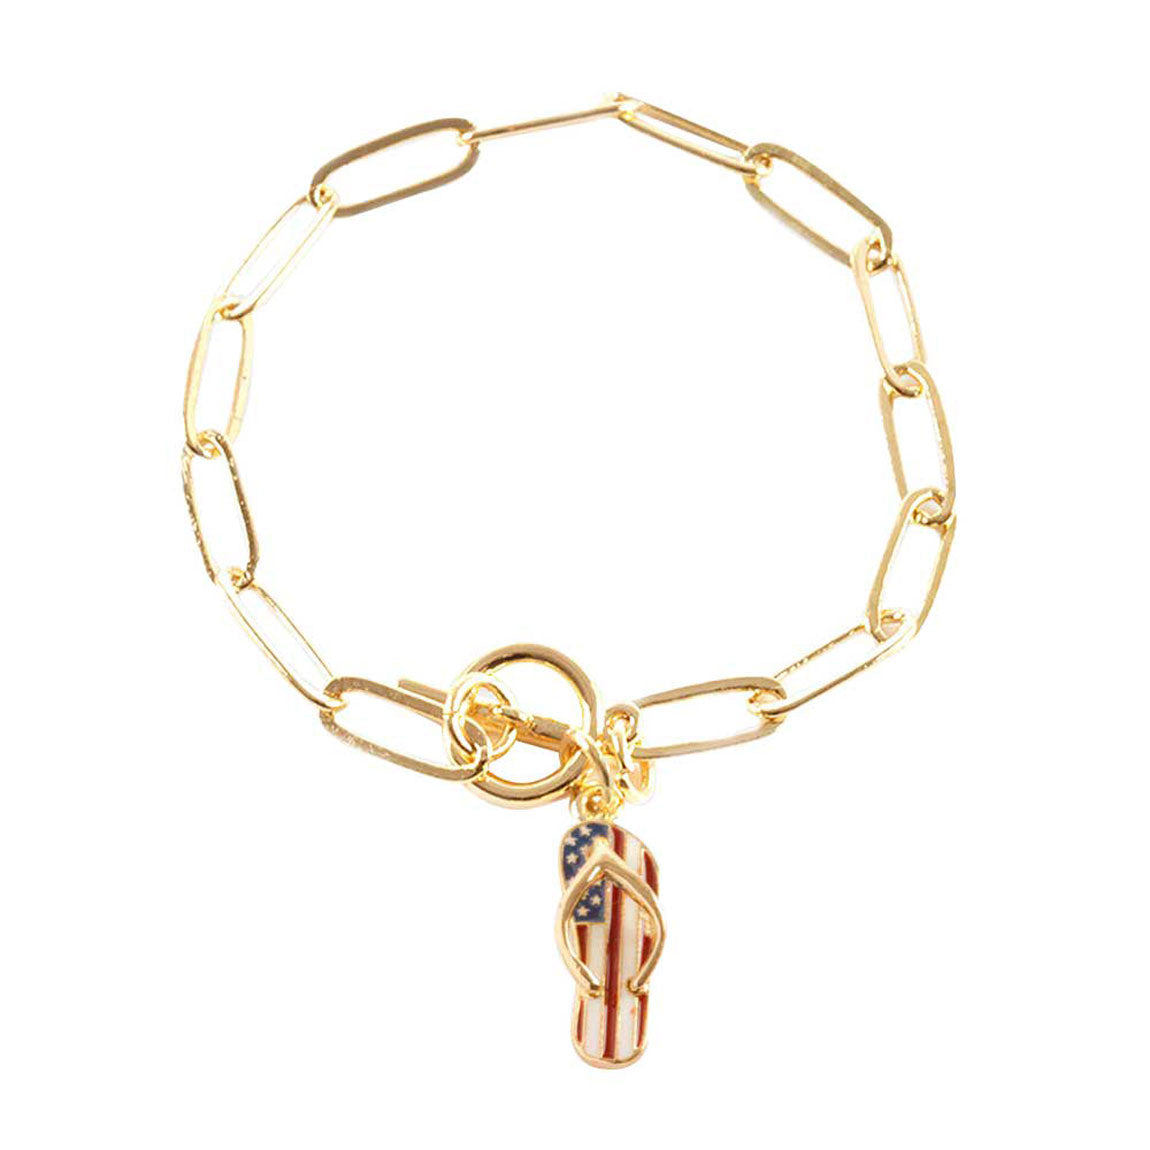 Gold American USA Flag Flip Flop Charm Toggle Bracelet, add a statement to your outfit with this beautiful accessory. It’s has beautiful USA Flag charm in our patriotic vibrant colors. Perfect of any time day or night, great for election day, national holiday, show how much you love this country.  